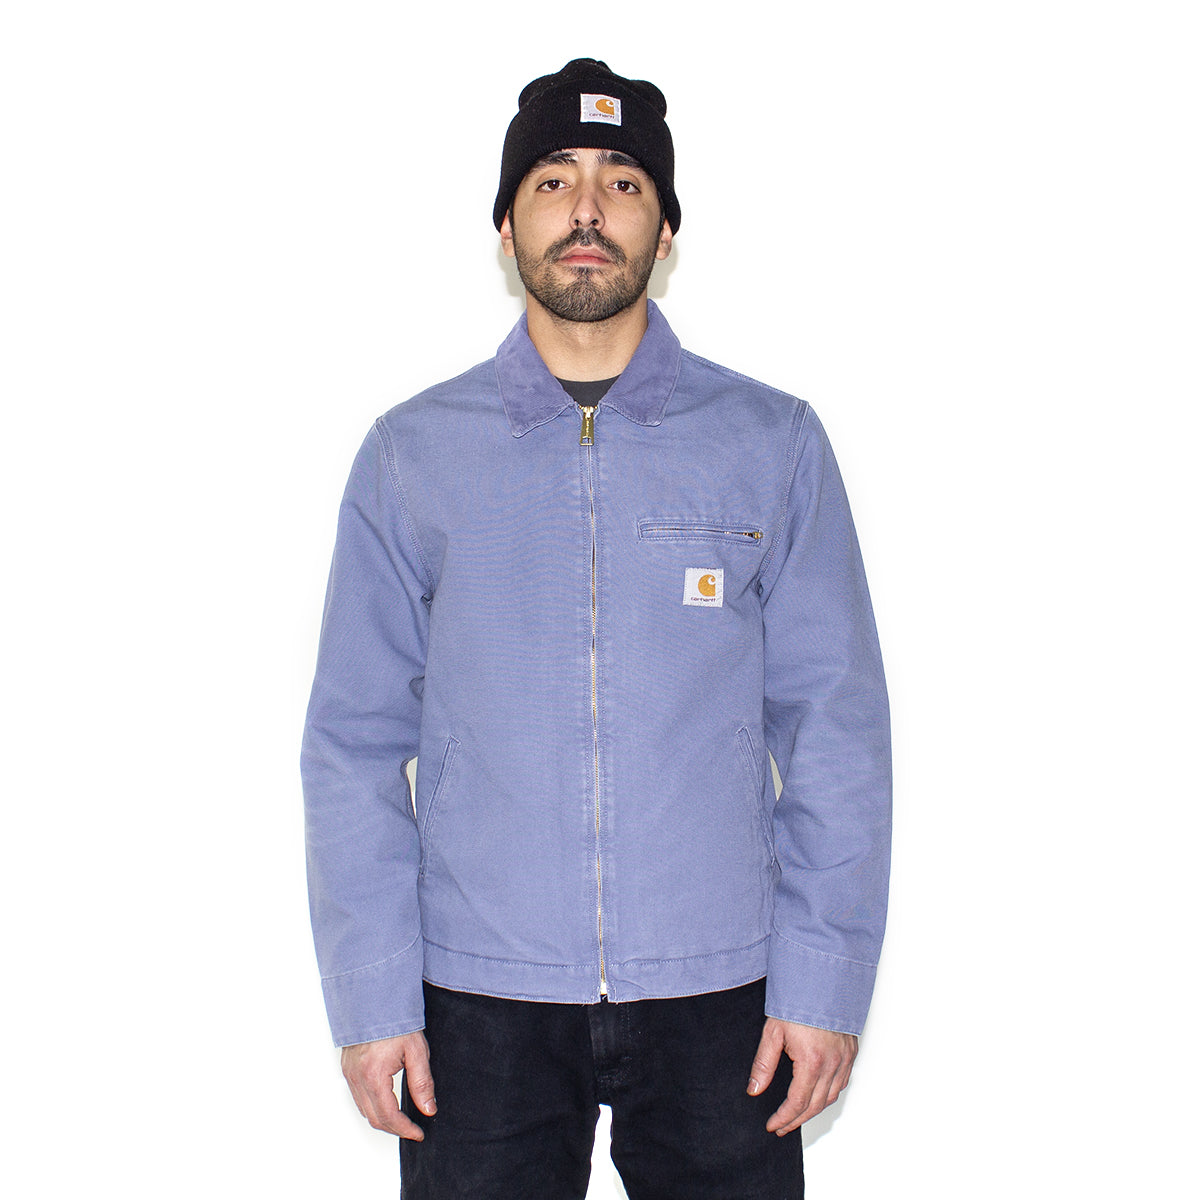 Carhartt WIP | Detroit Jacket Style # I032940-25A Color : Bay Blue